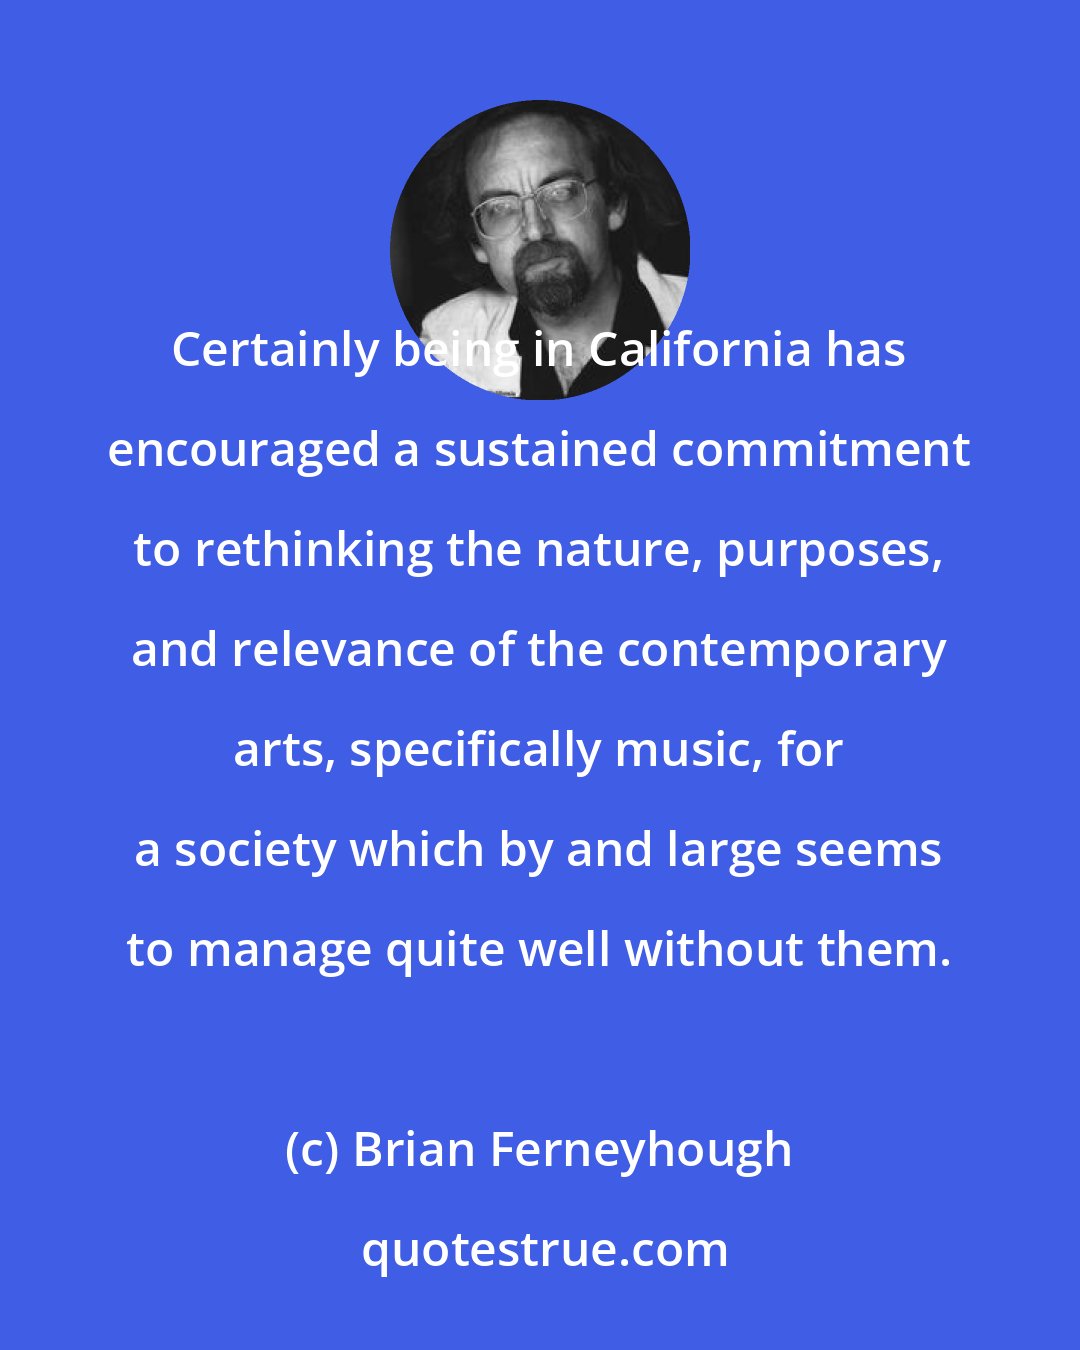 Brian Ferneyhough: Certainly being in California has encouraged a sustained commitment to rethinking the nature, purposes, and relevance of the contemporary arts, specifically music, for a society which by and large seems to manage quite well without them.